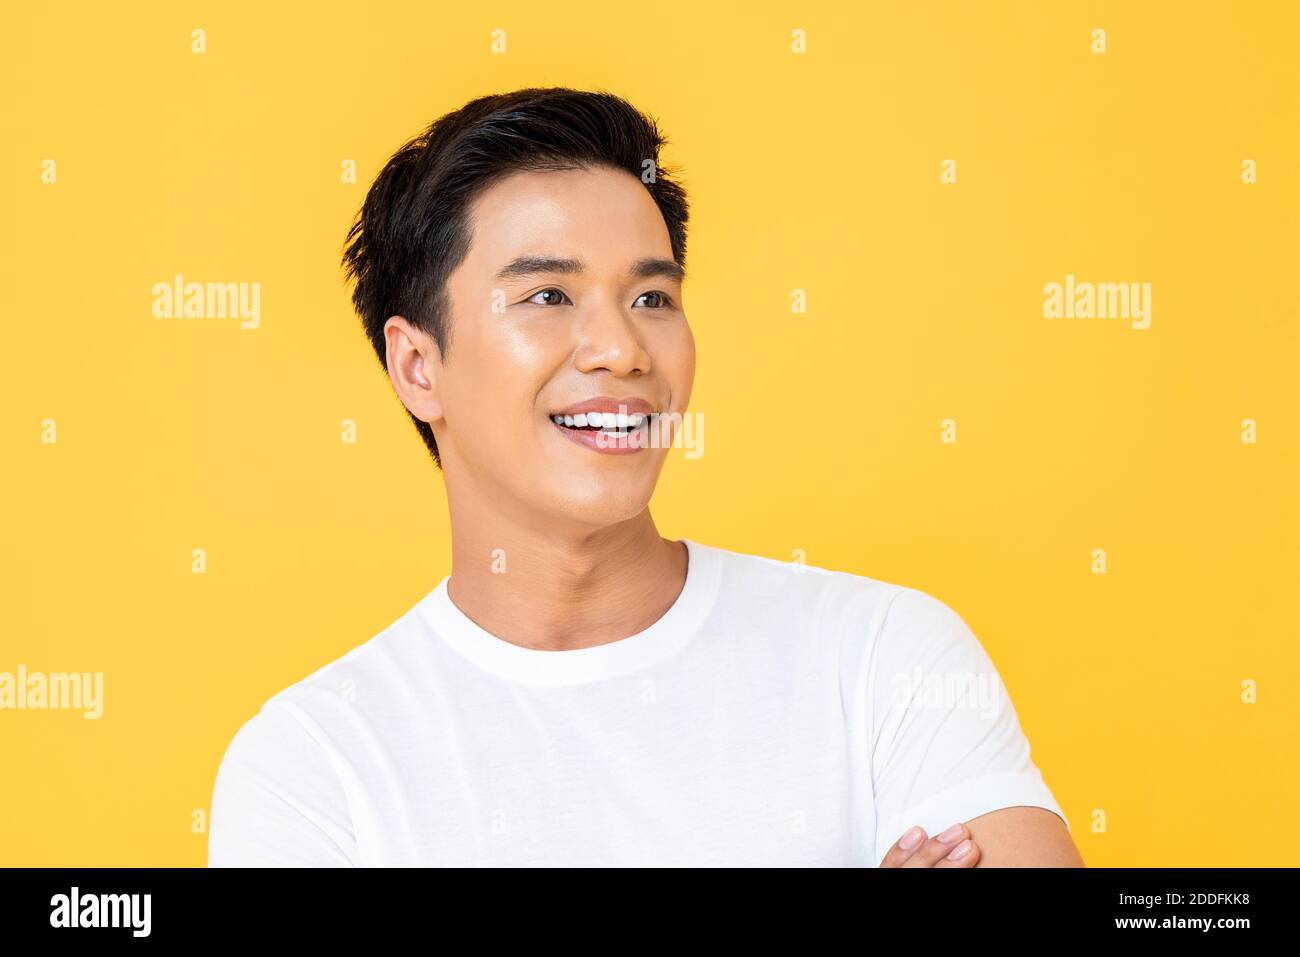 Close up portrait of young handsome Asian man cheerfully smiling and looking away in isolated studio yellow background Stock Photo